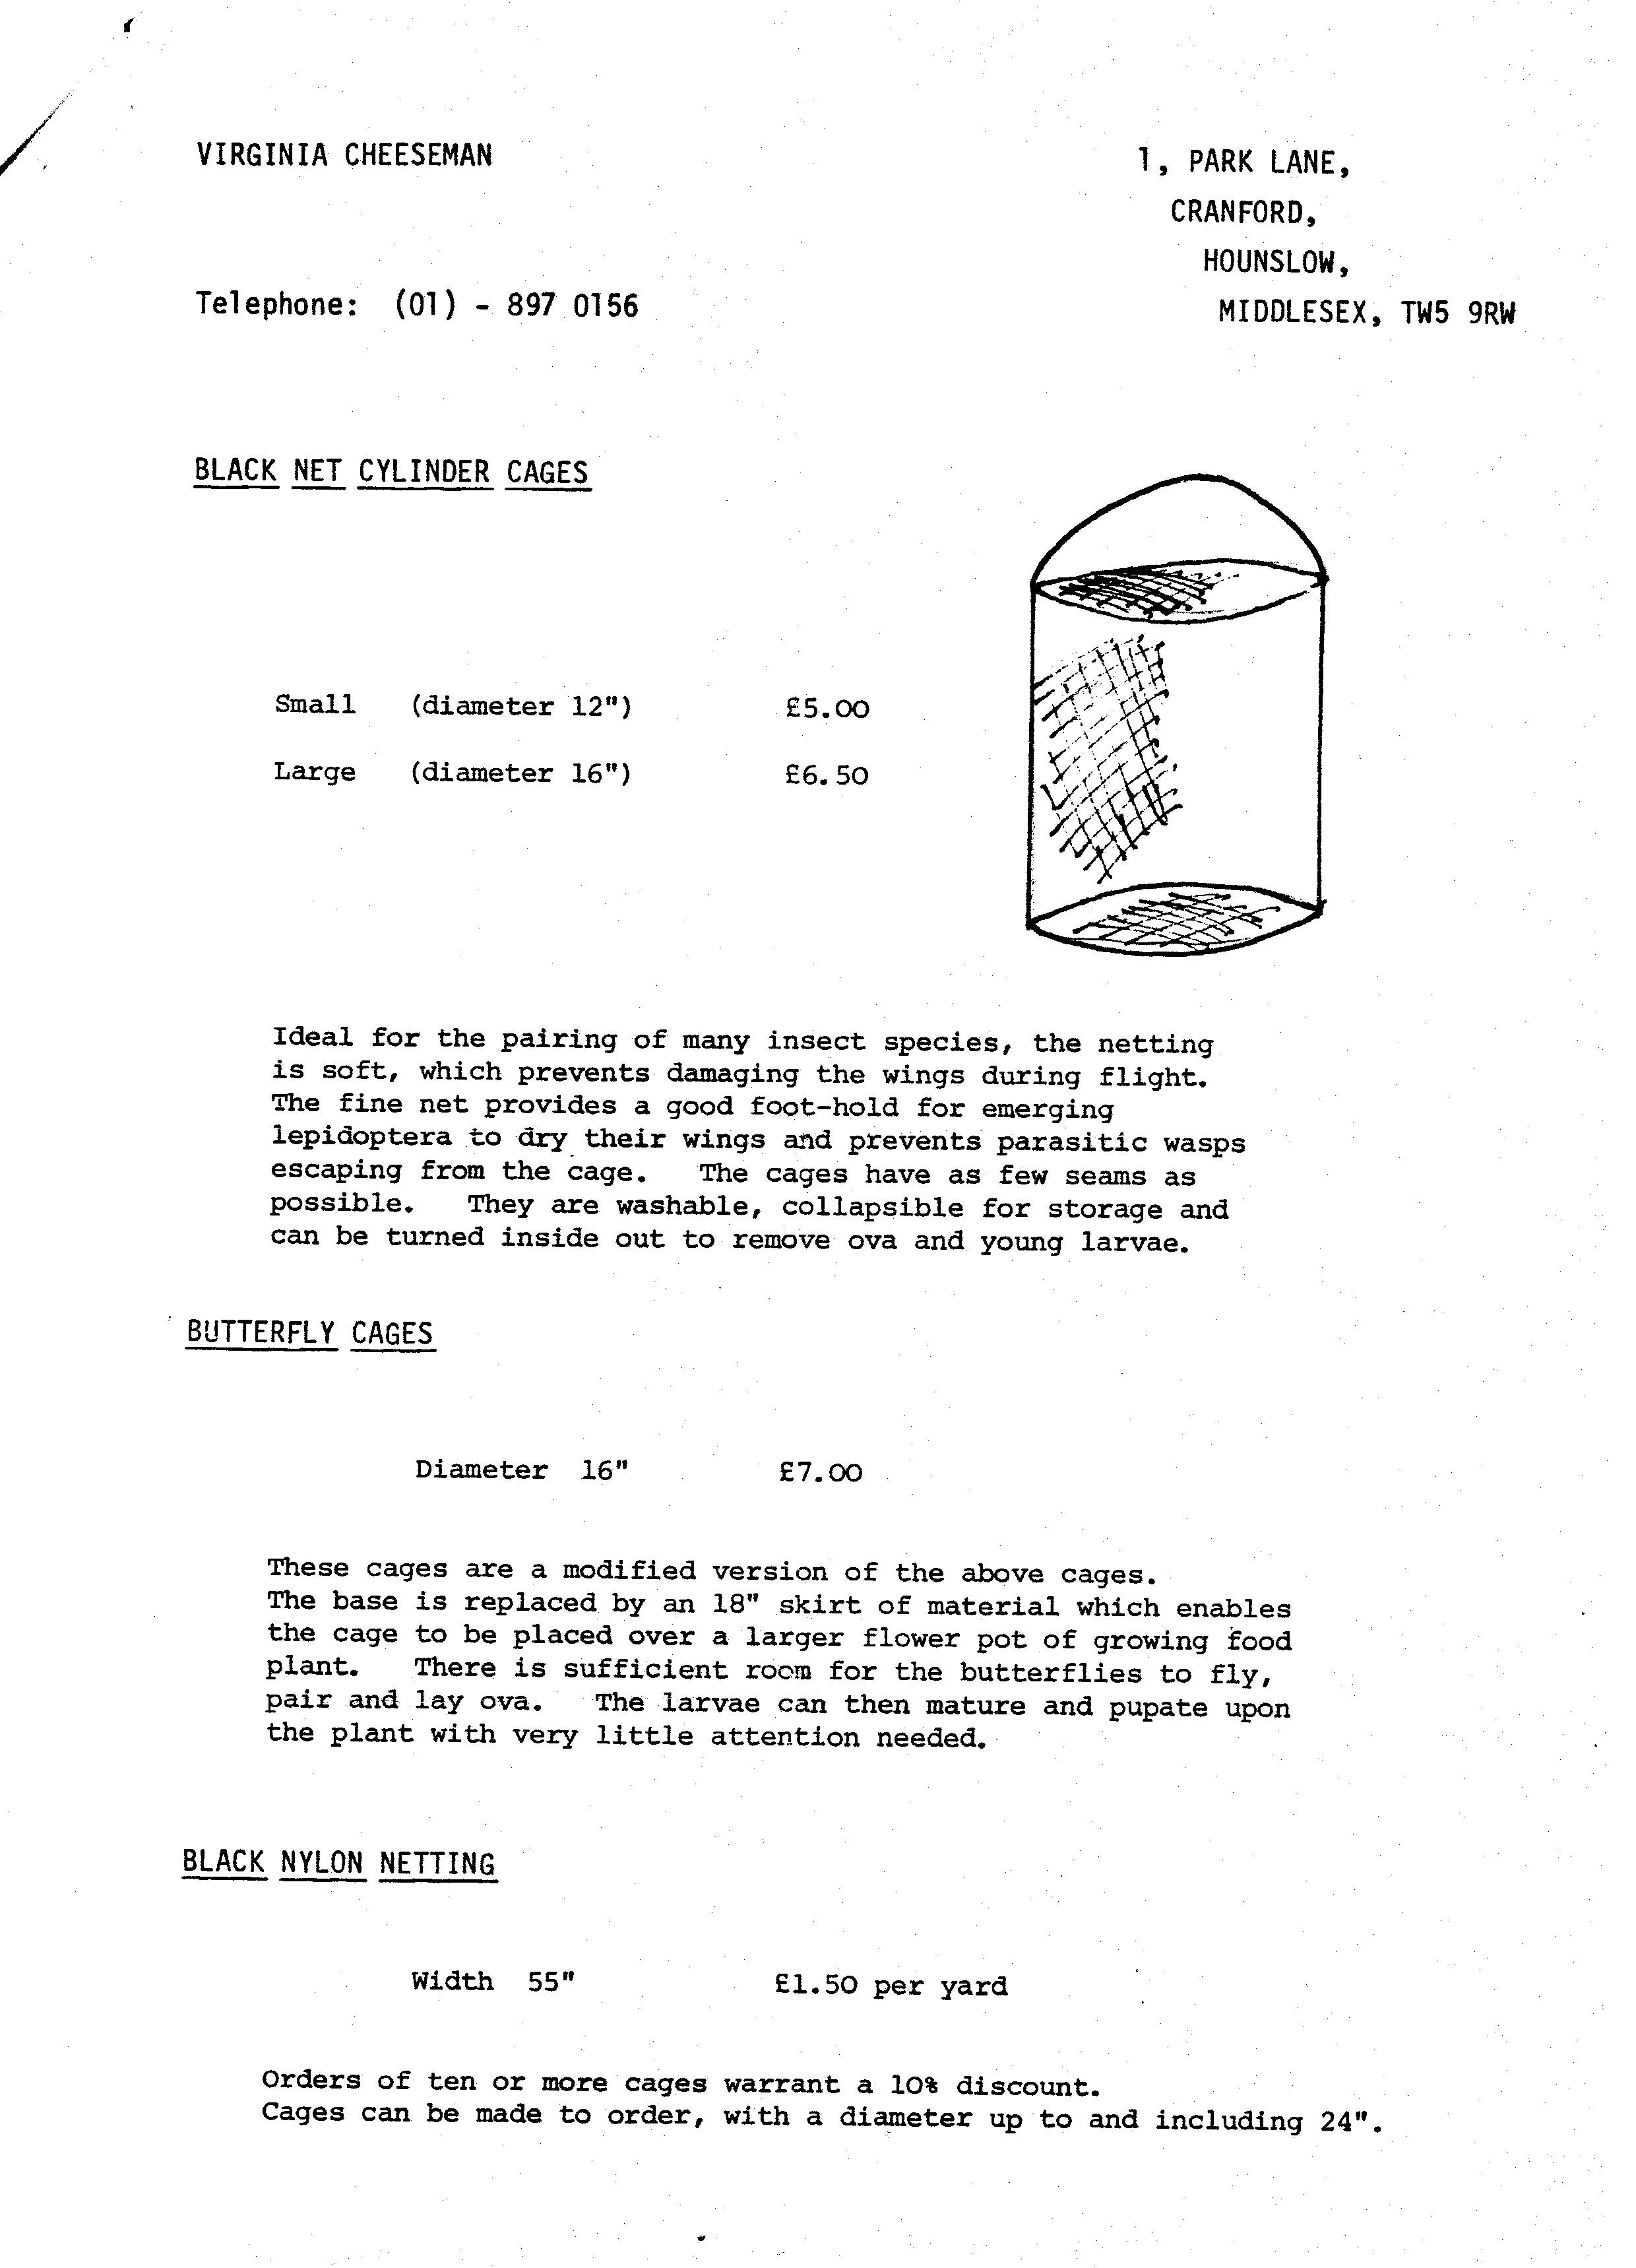 Equipment list from 1982